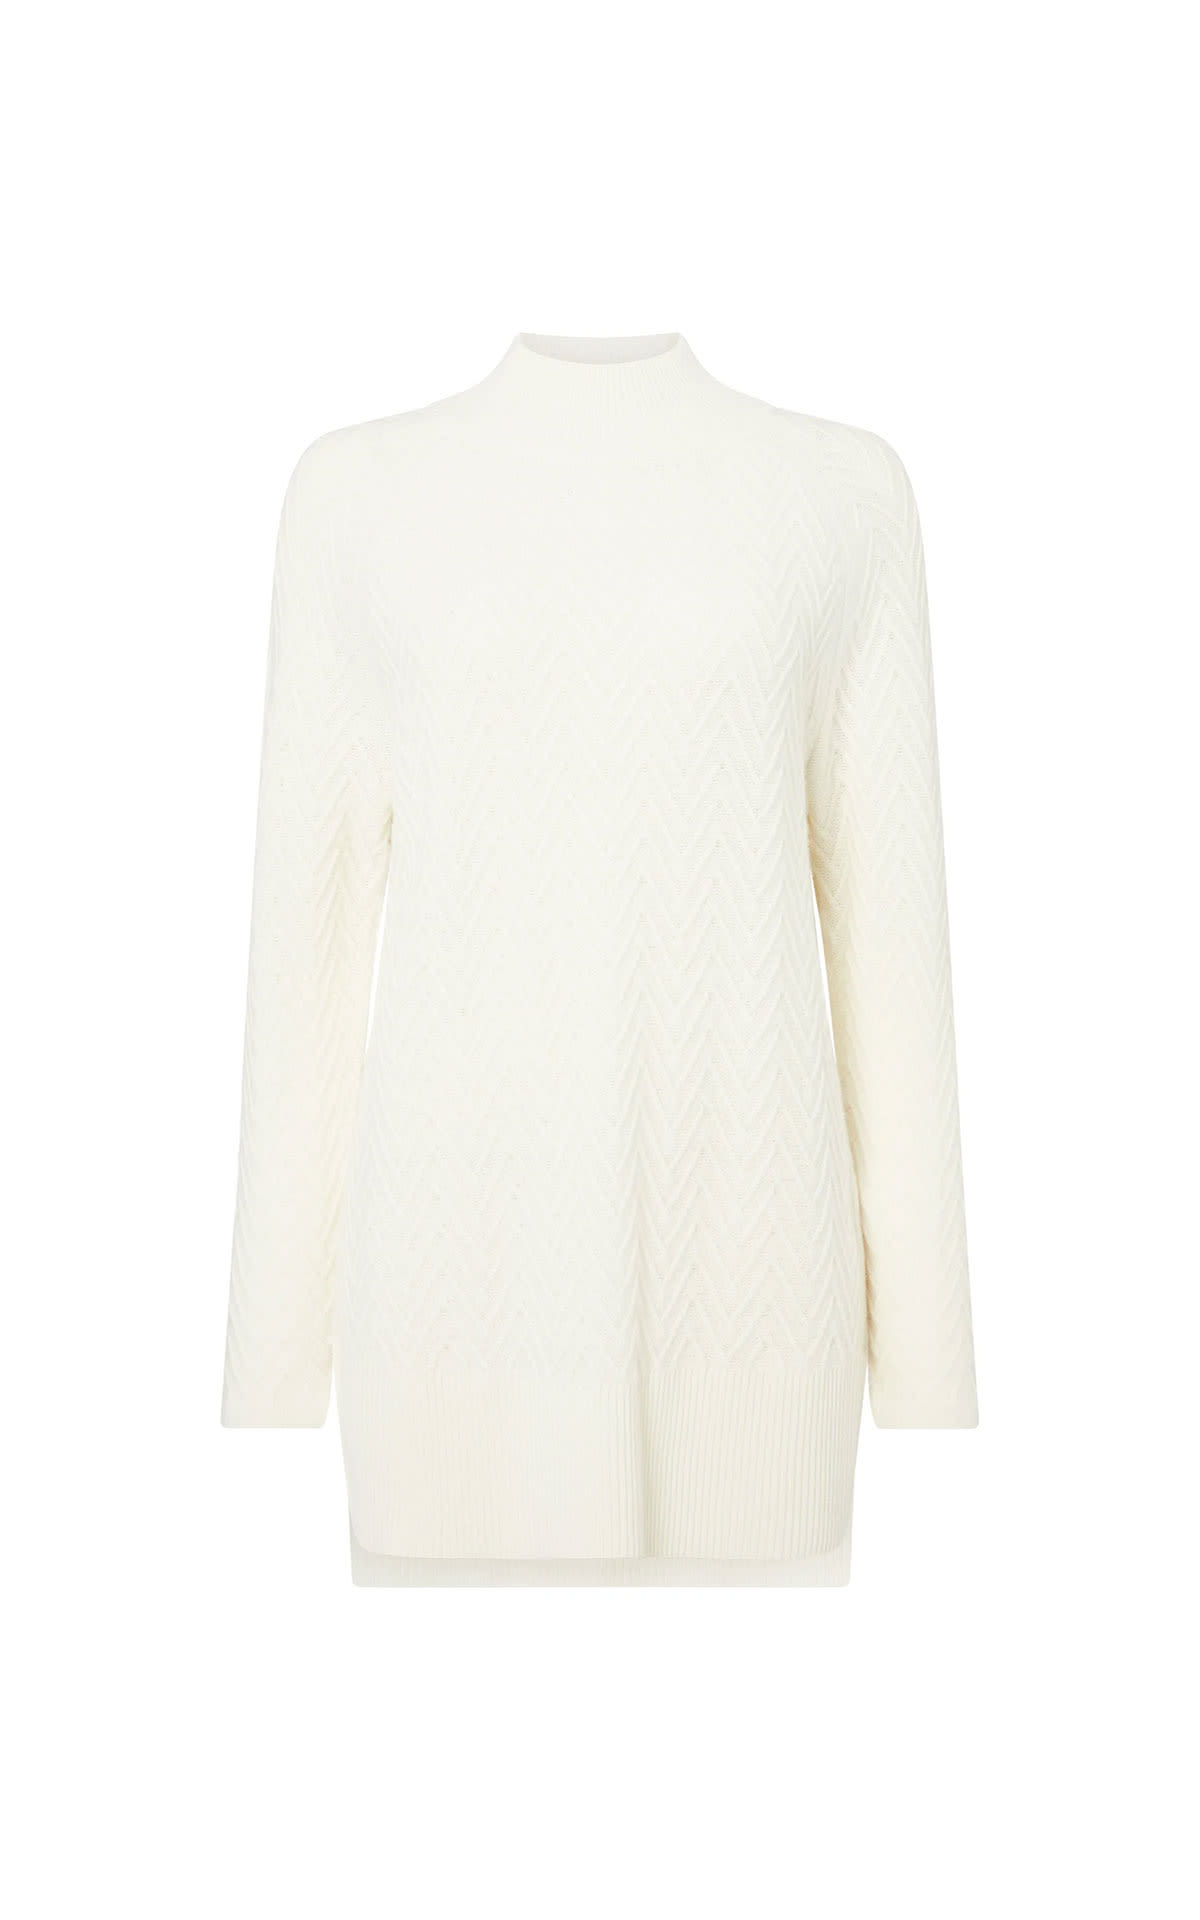 N. Peal Chevron stitch cashmere tunic from Bicester Village